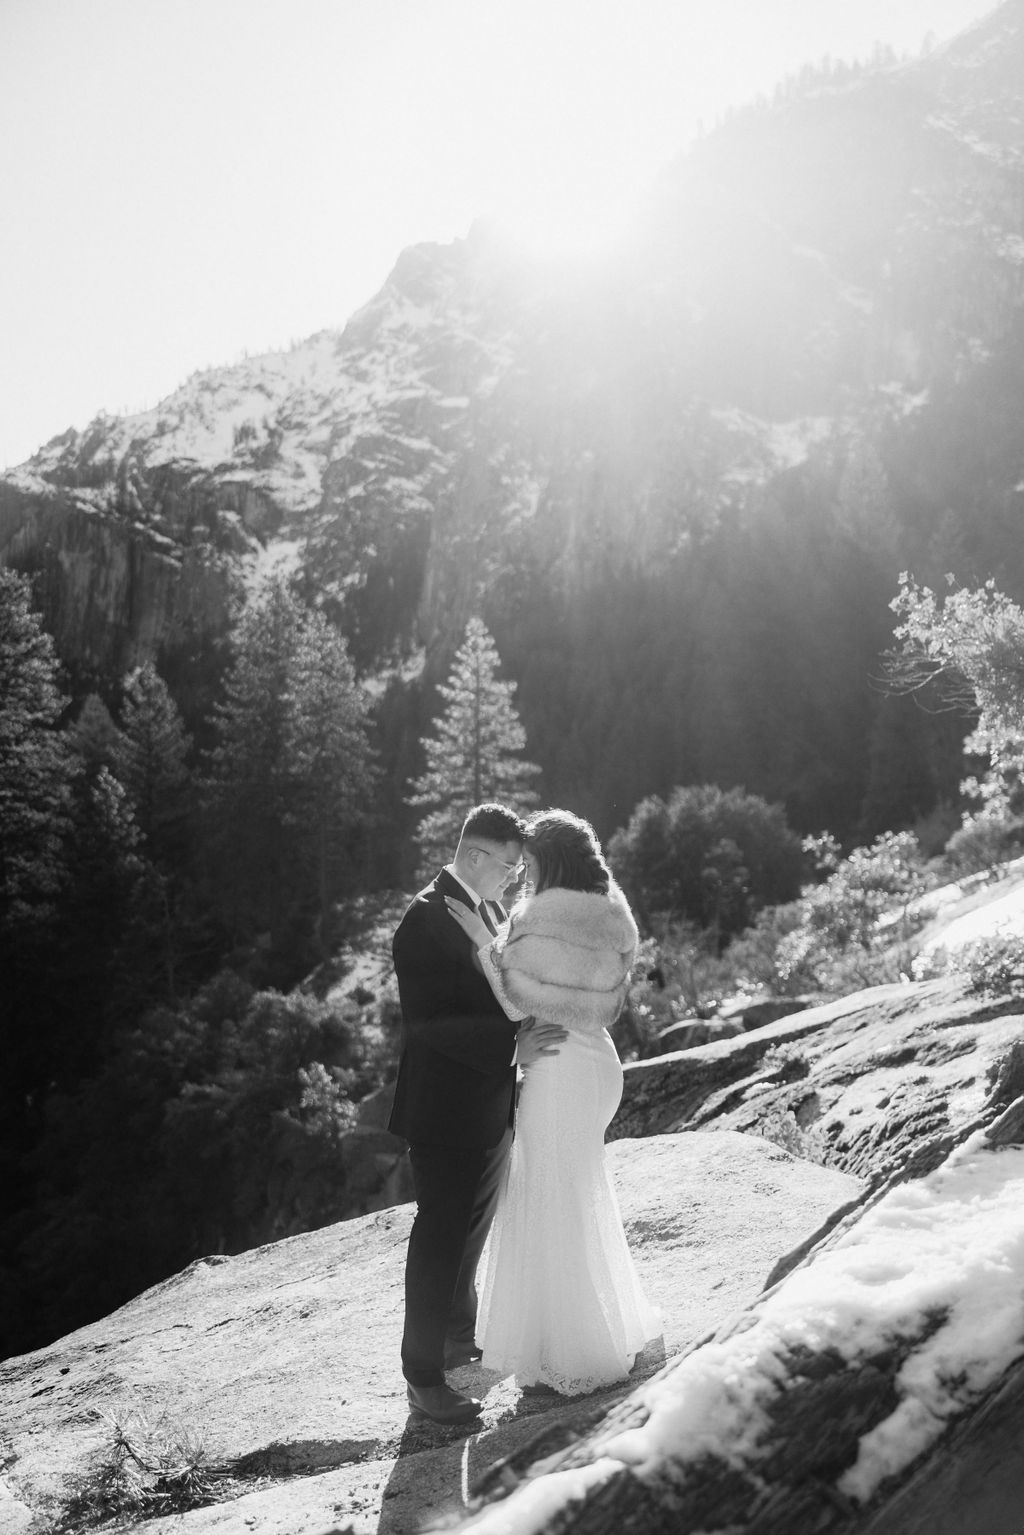 A couple in wedding attire dancing on a mountain overlook with scenic cliffs in the background.